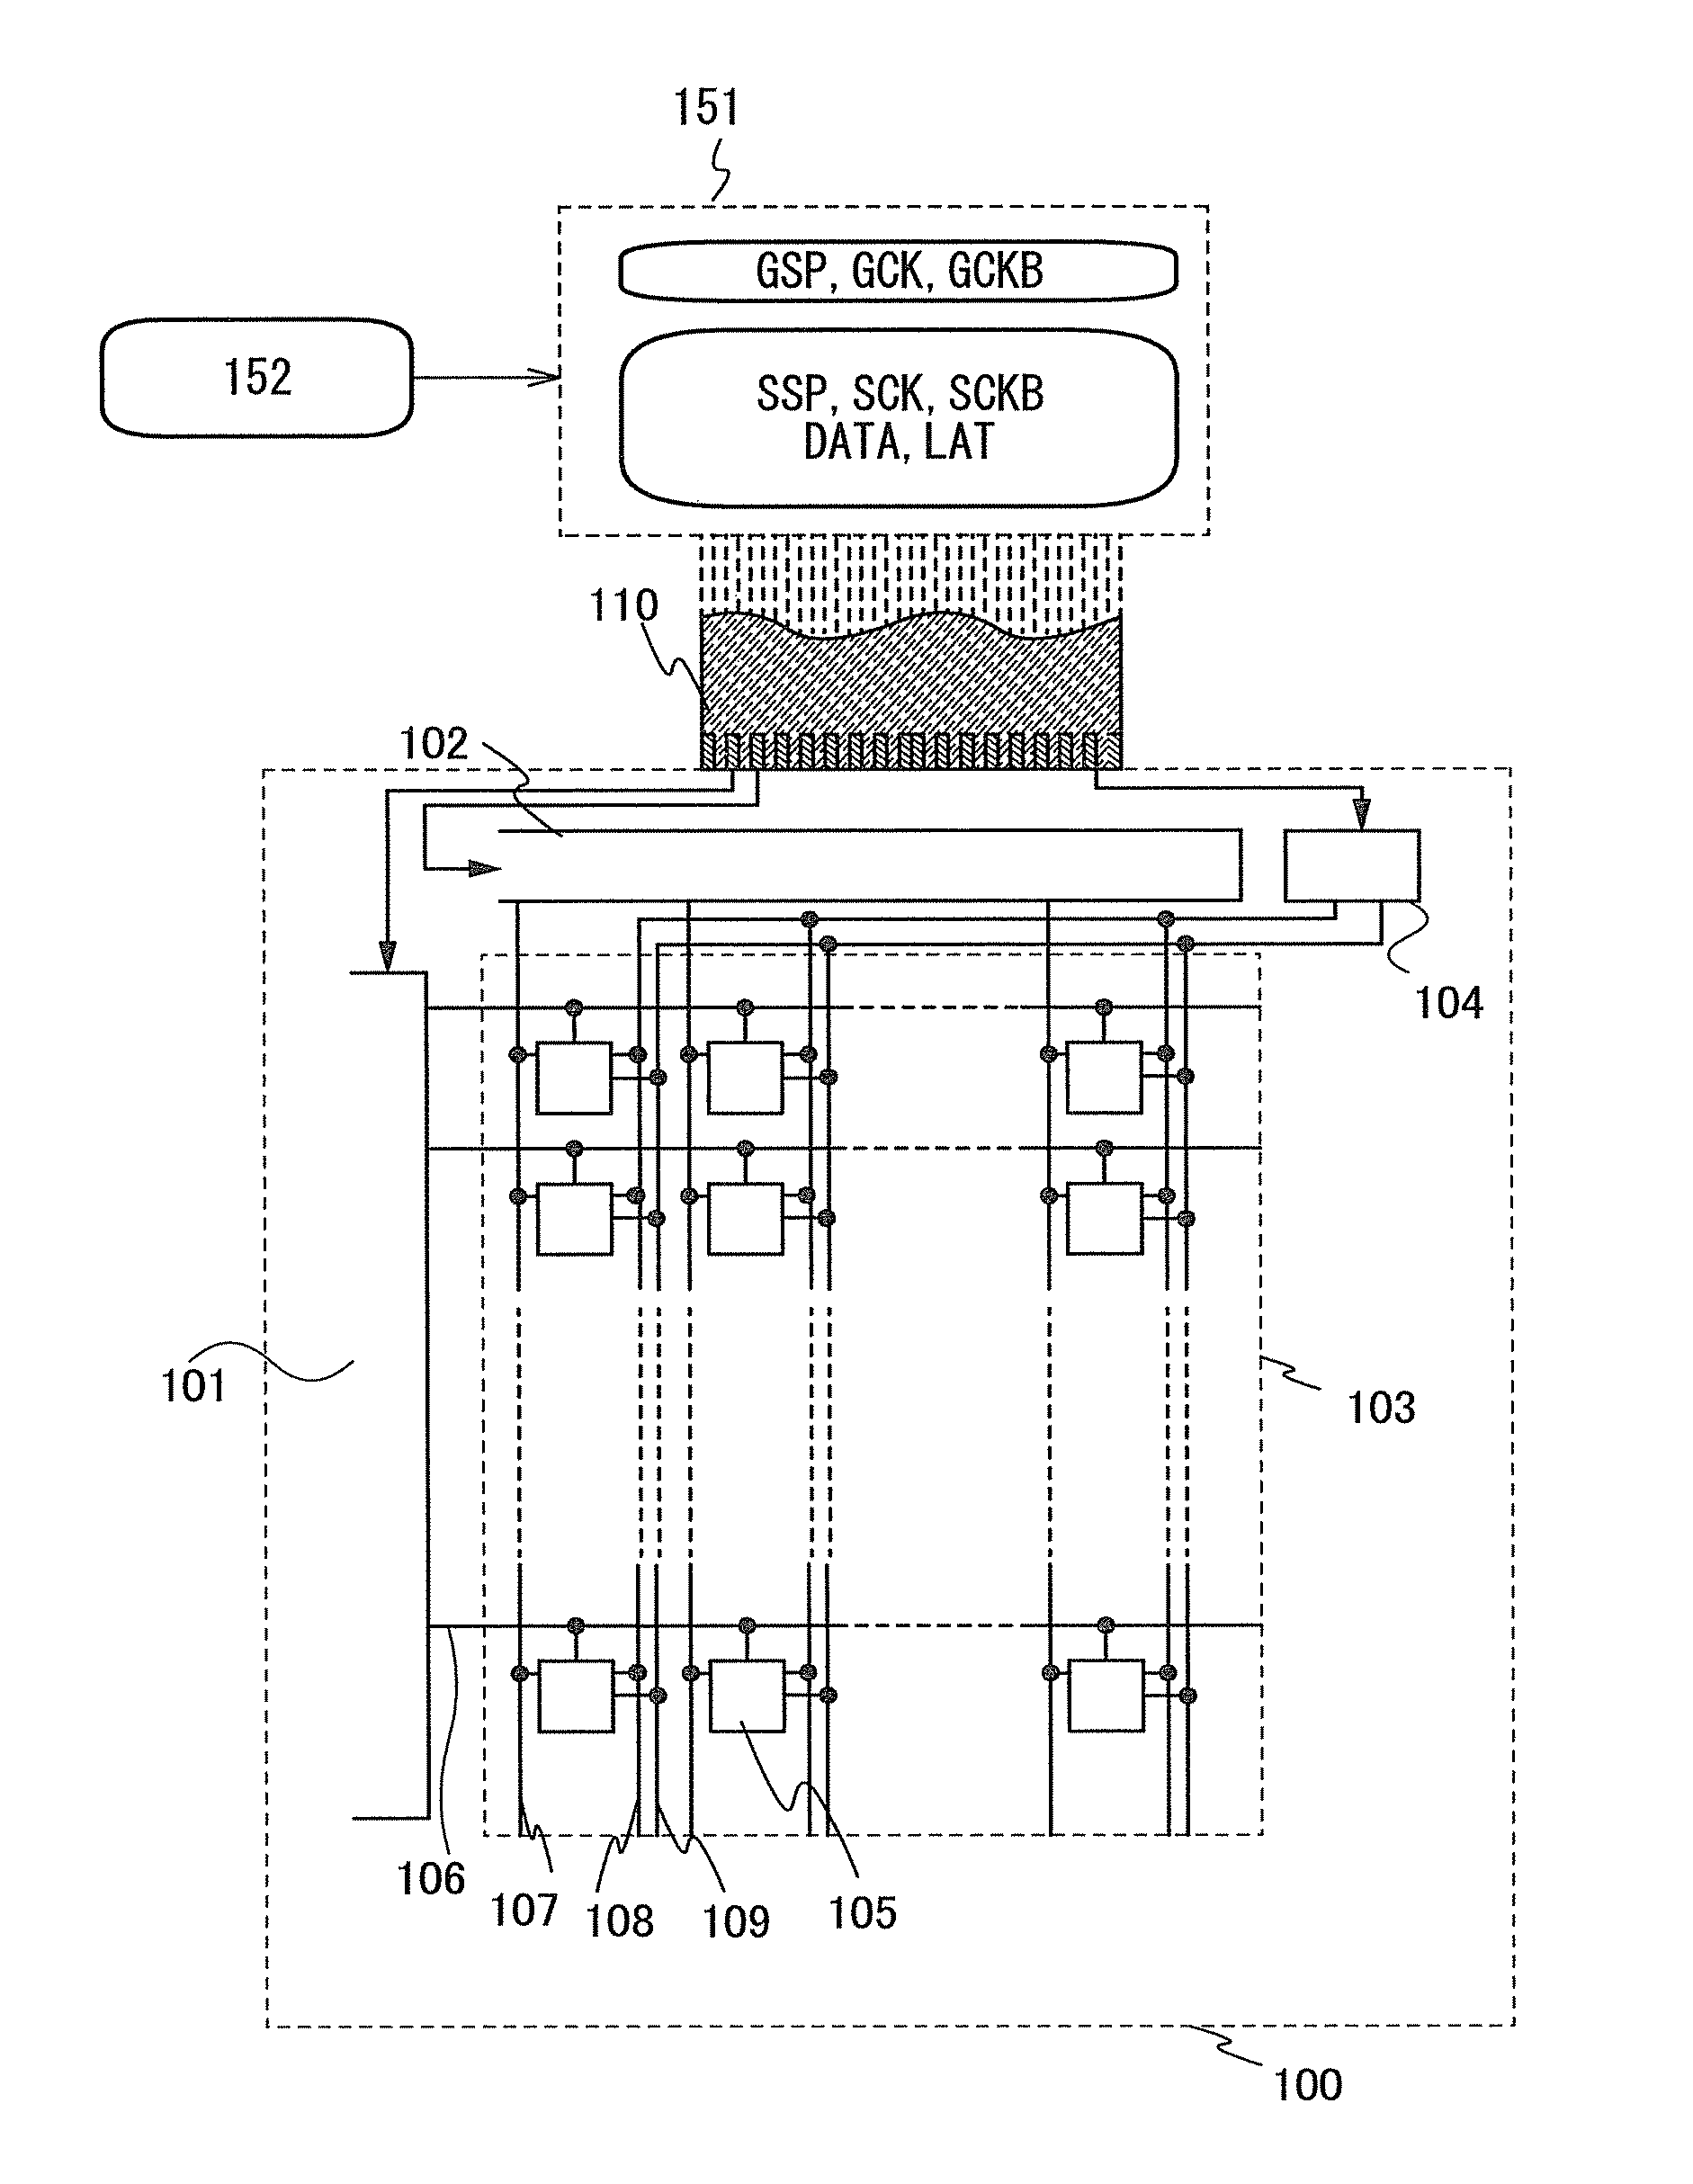 Display device, method for driving the same, and electronic device using the display device and the method